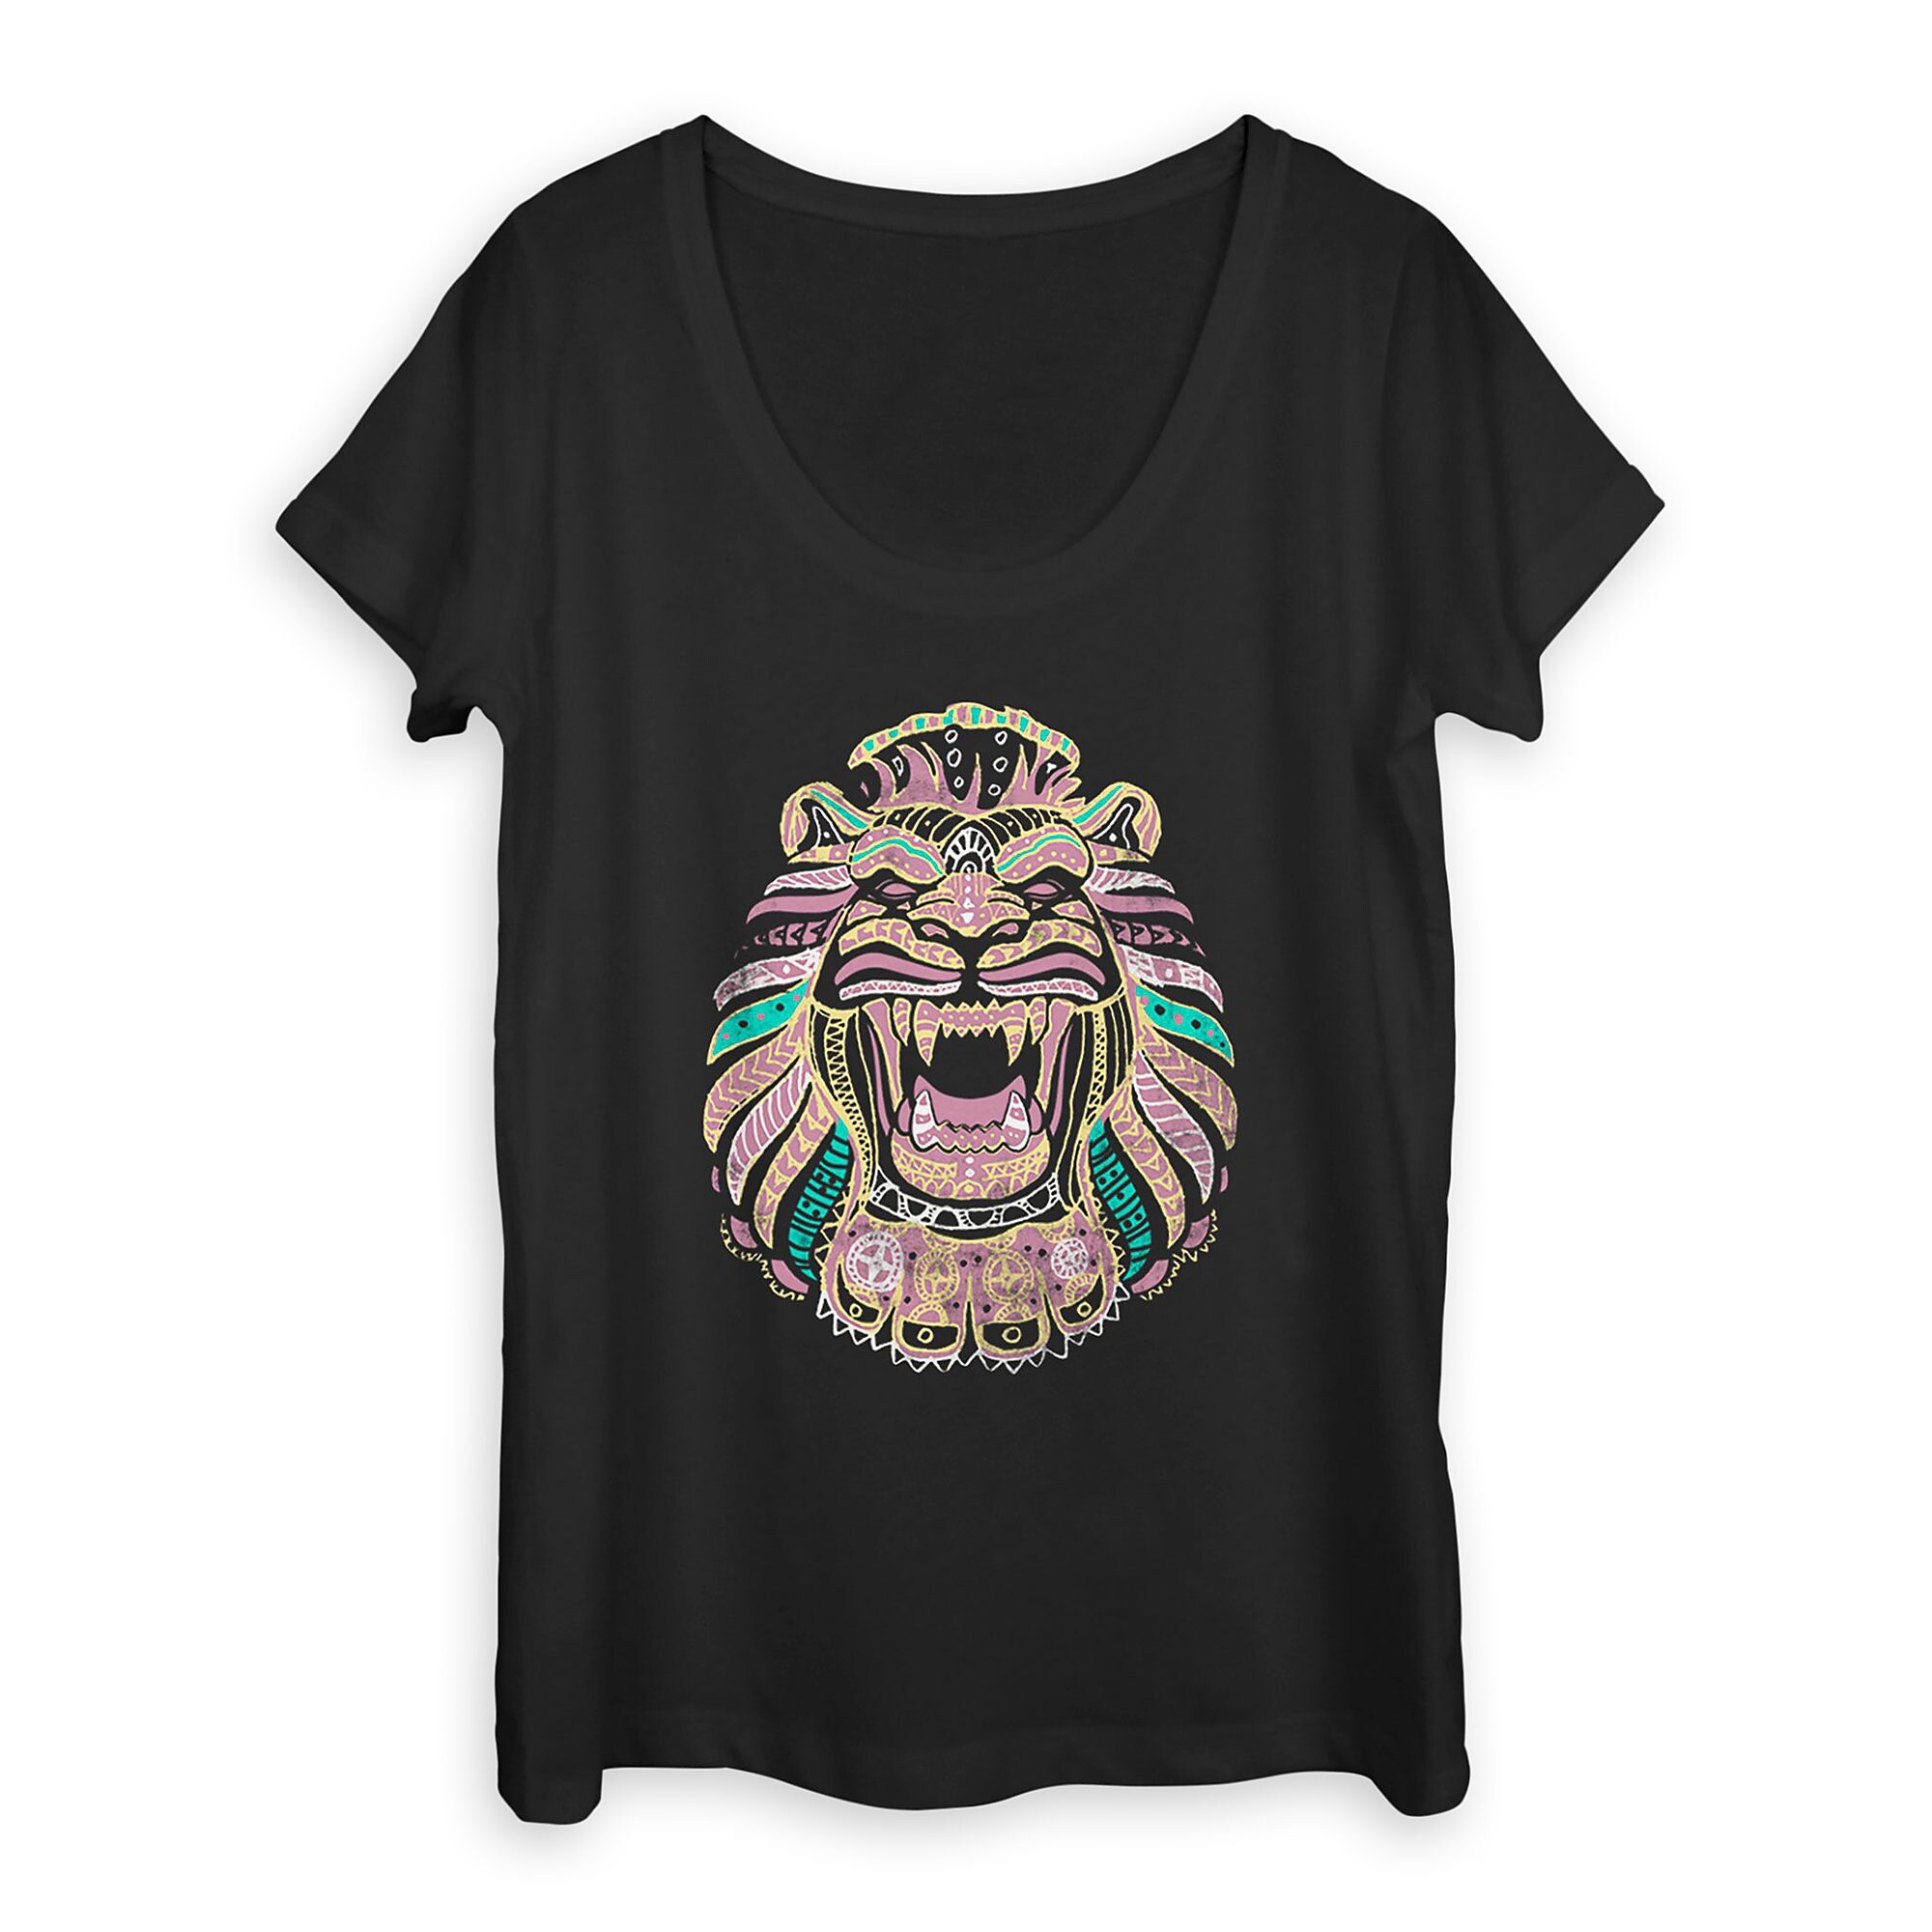 Cave of Wonders T-Shirt for Women - Aladdin - Live Action Film